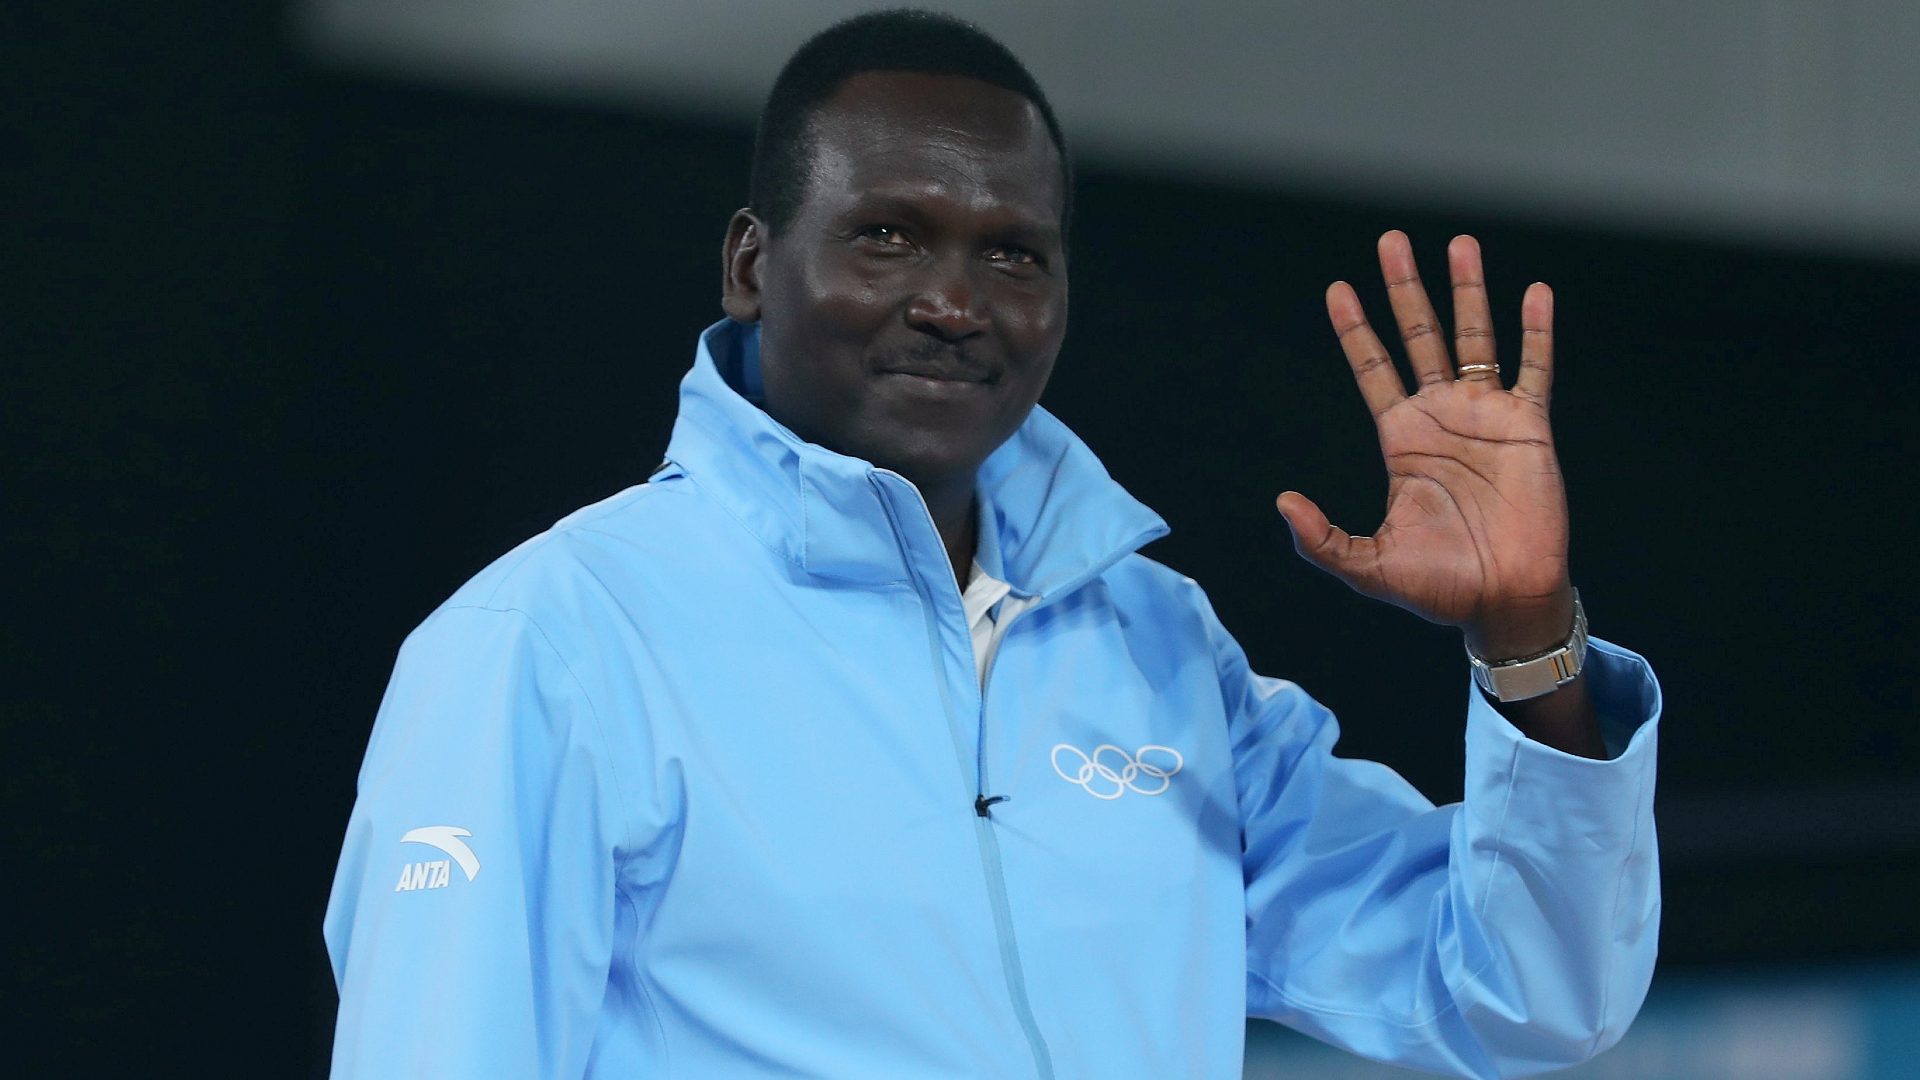 Paul Tergat in his function as IOC member at the Summer Youth Olympics in 2018 (Tergat in a file photo)